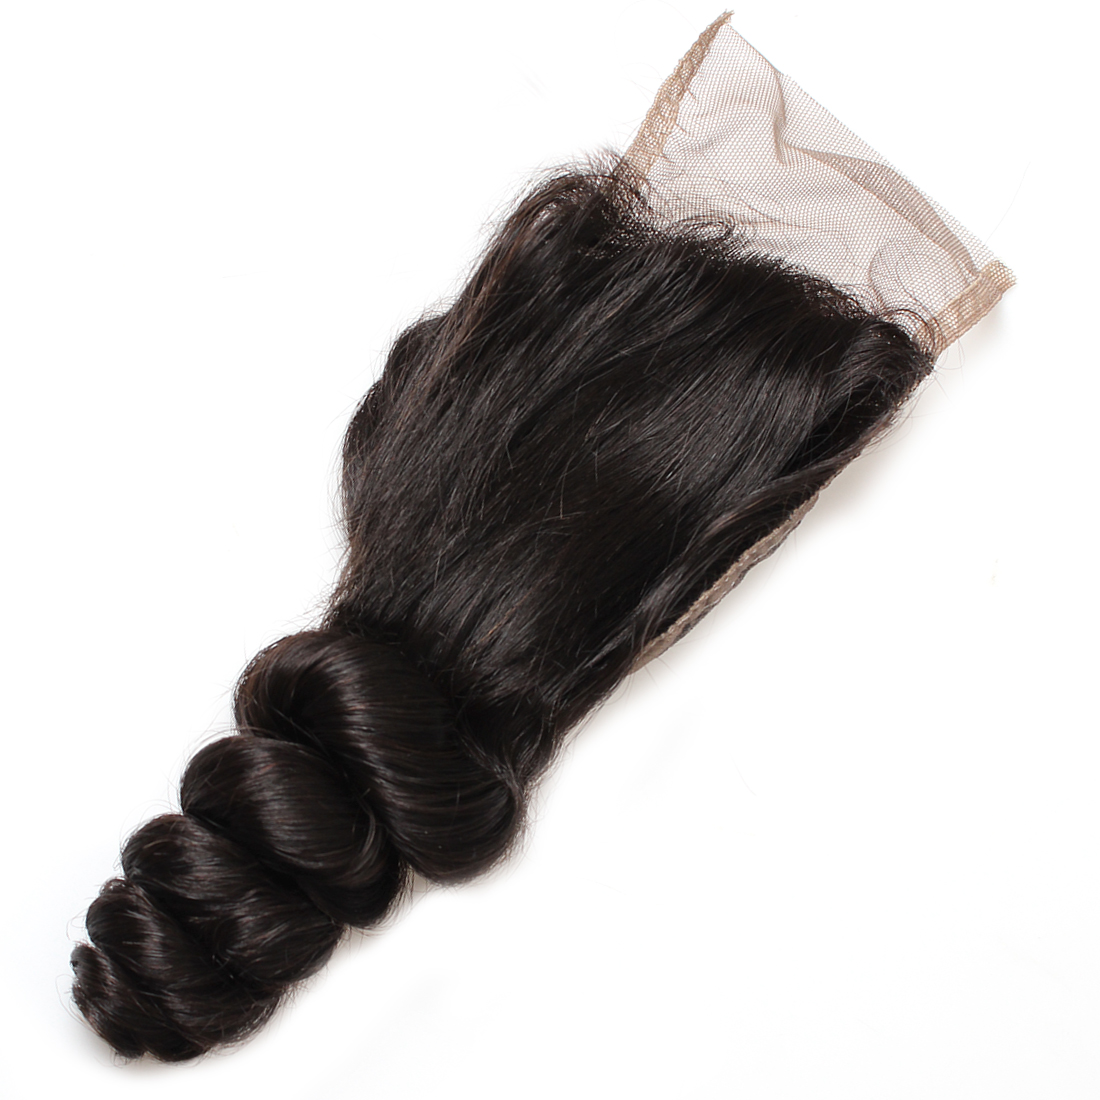 

10A Remy Human Hair 4*4 Loose Wave Swiss Lace Closure 1 PC Free Part Brazilian Peruvian Malaysian Indian Hair Weaves Closure 8-20inch, Natural color